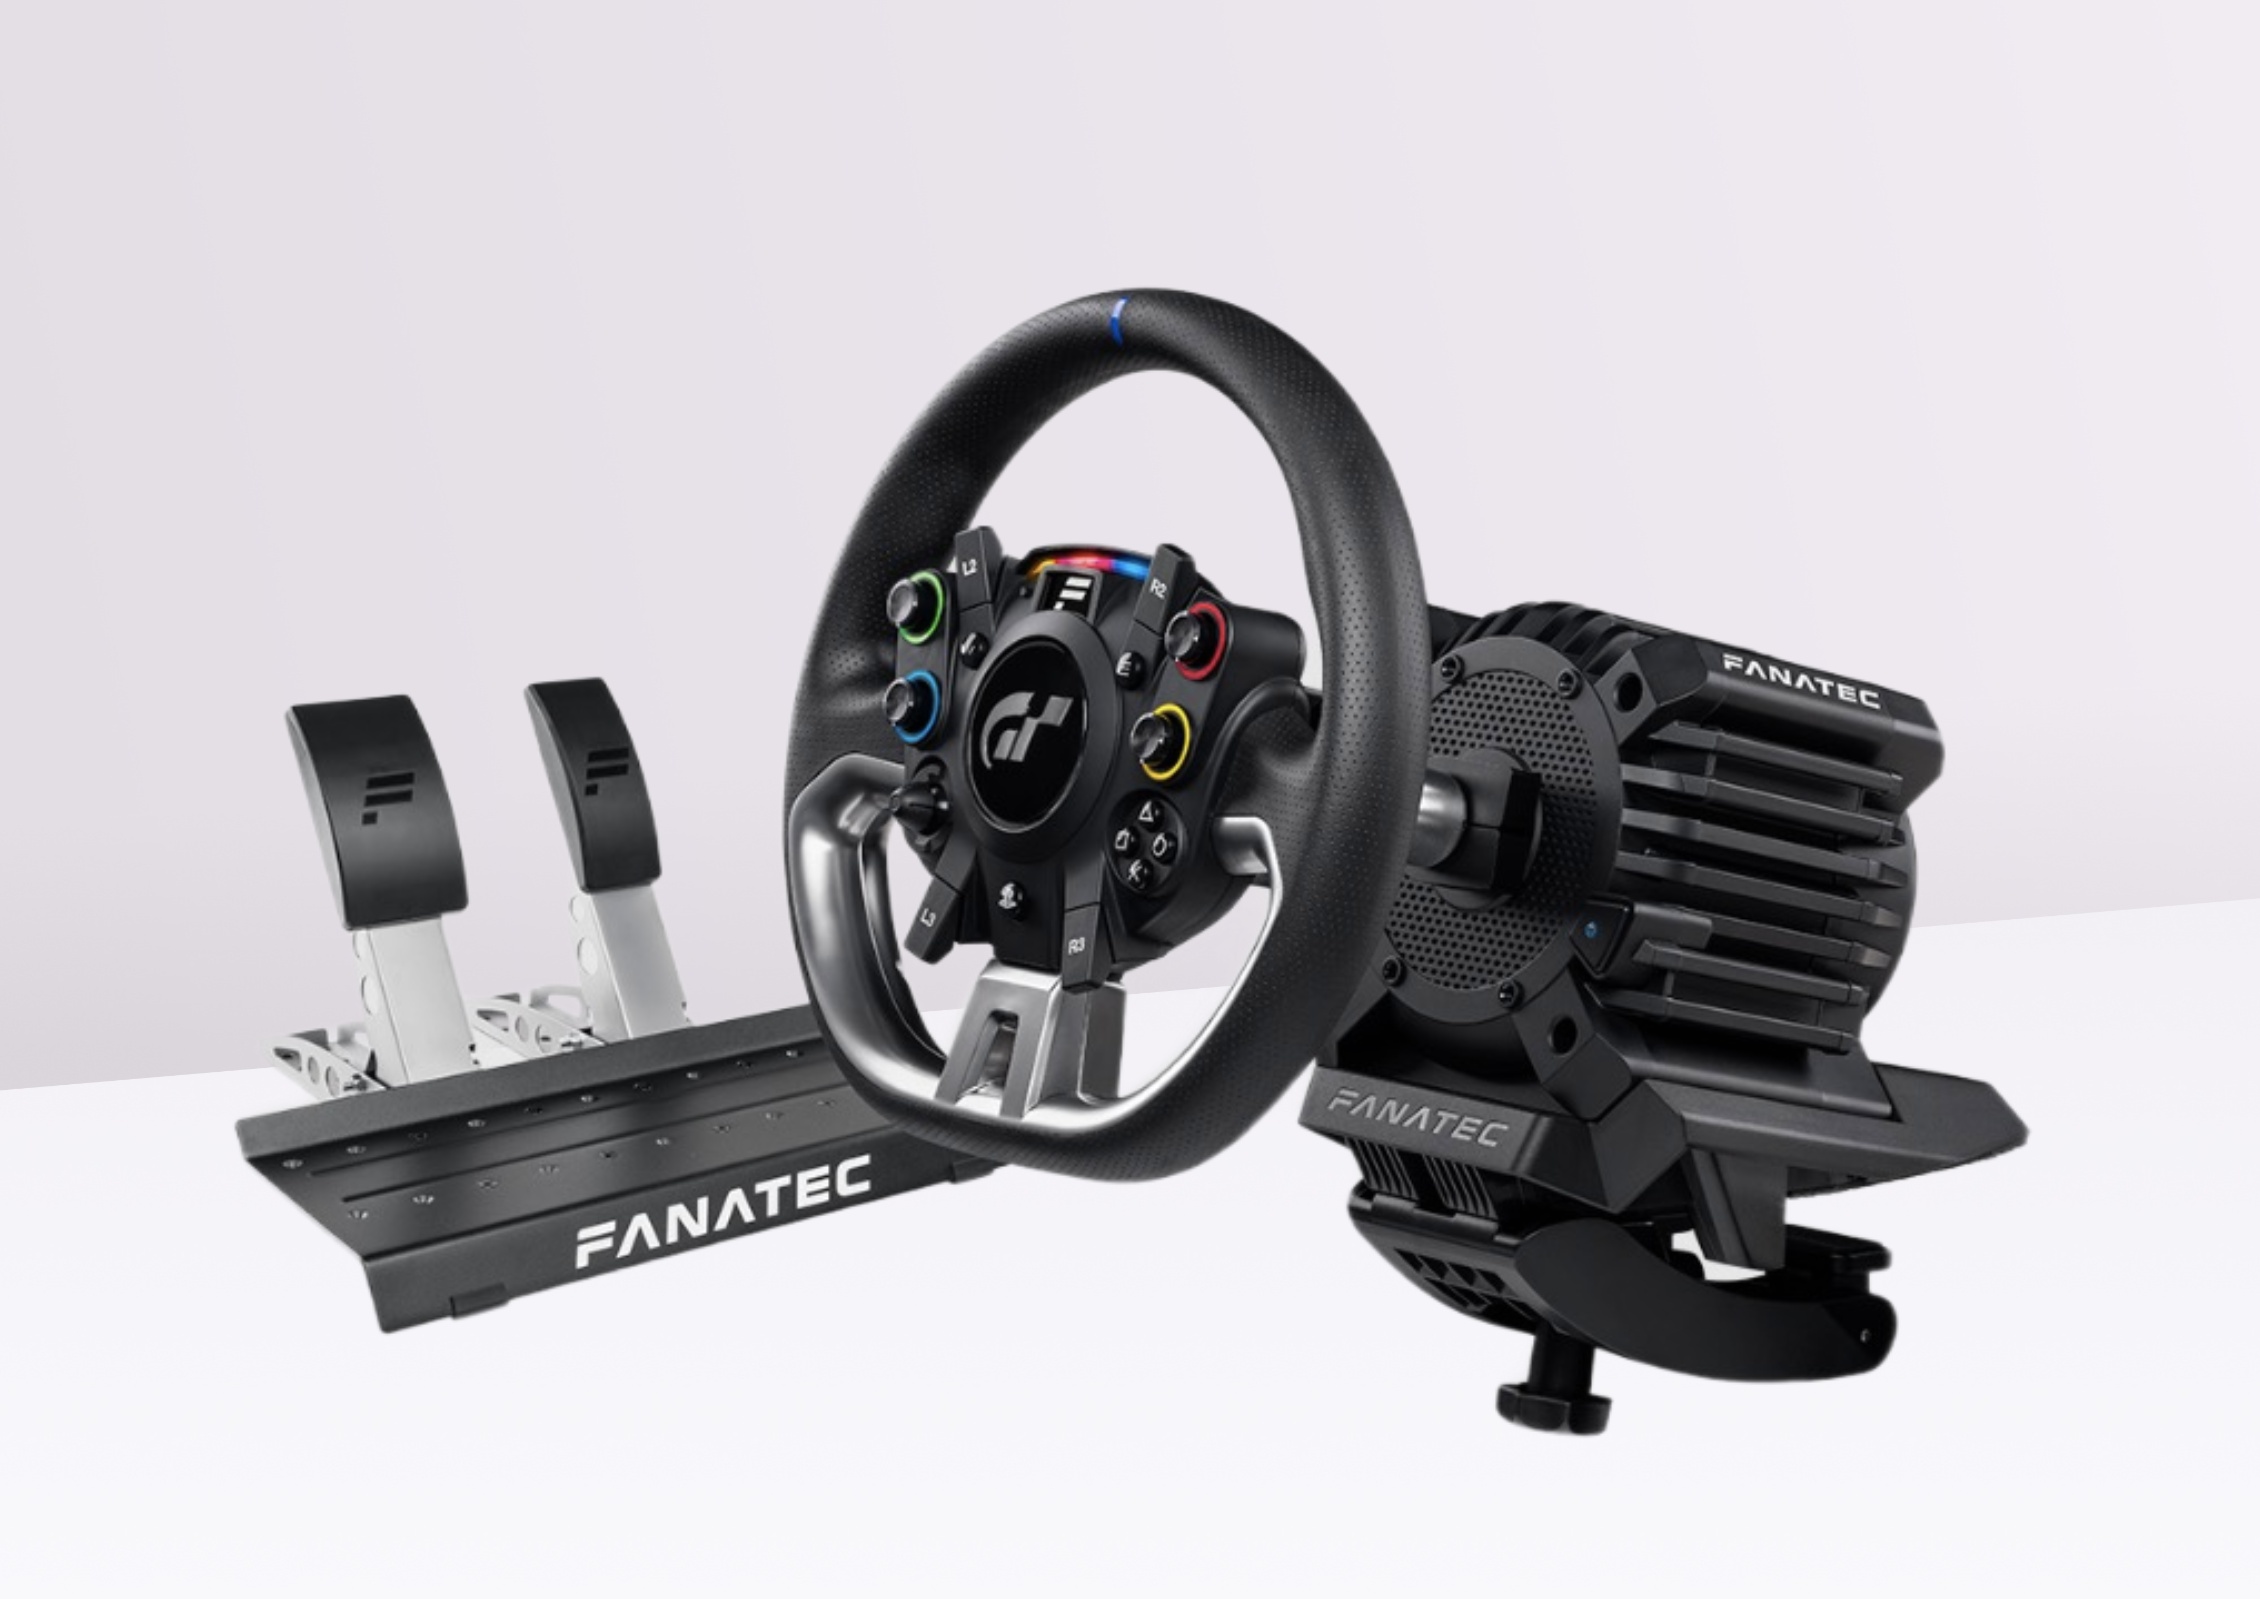 Test and Reviews of the Fanatec Gran Turismo DD Pro bundle